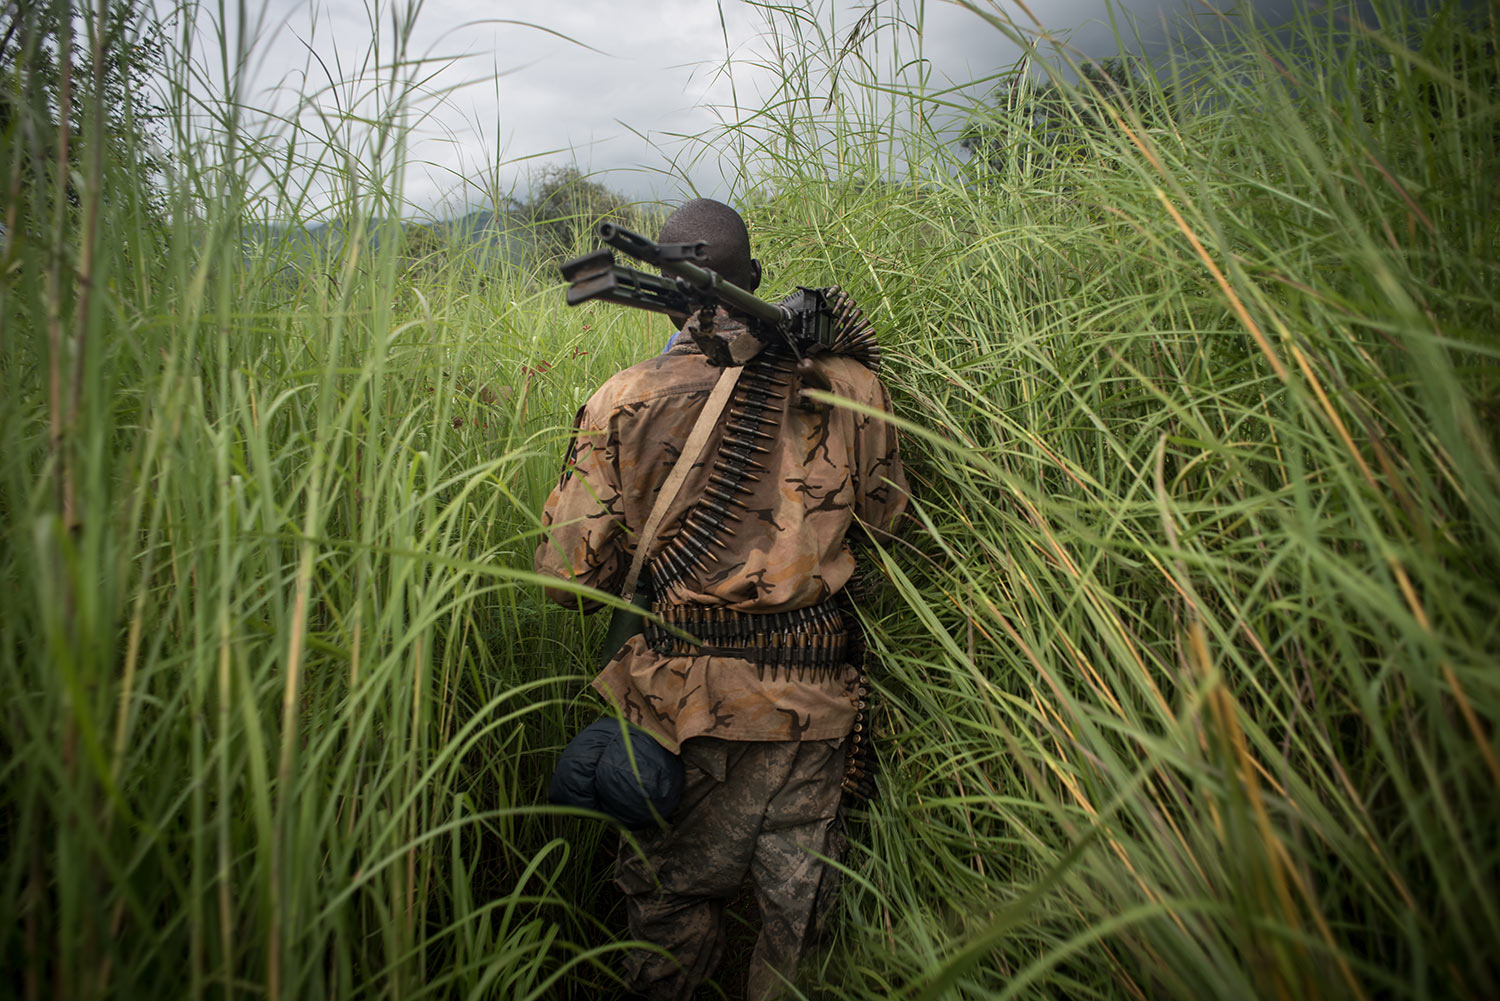 A SPLA-In Opposition soldier walks through the elephant grass in rebel-held Magwi county of South Sudan’s Eastern Equatoria state on August 28, 2017. USHMM/Jason Patinkin.